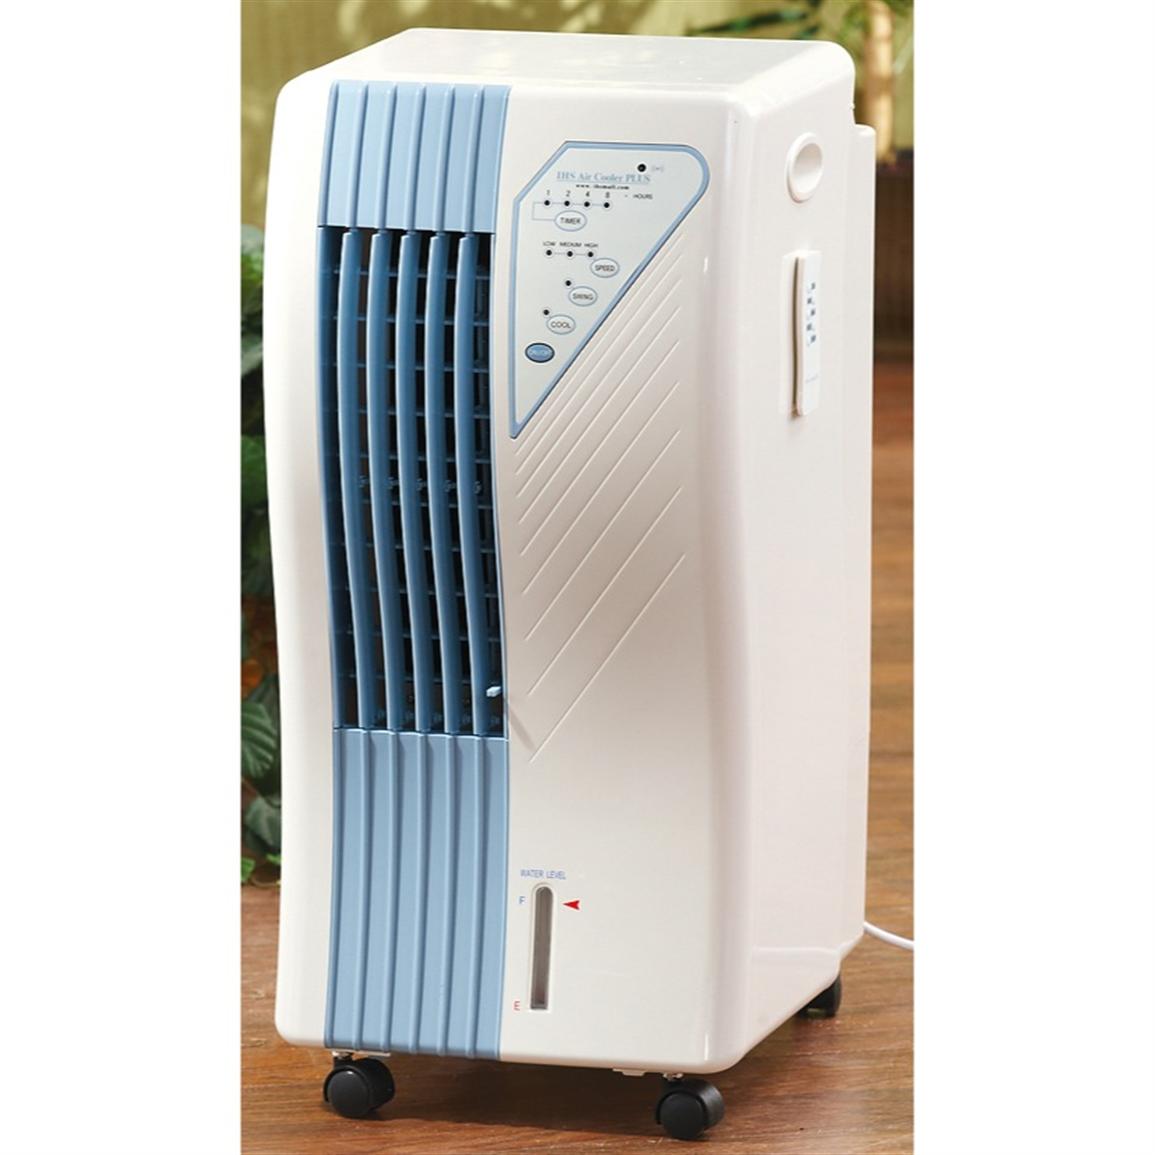 IHS® Air Cooler Plus - 202795, Healthy Living at Sportsman's Guide